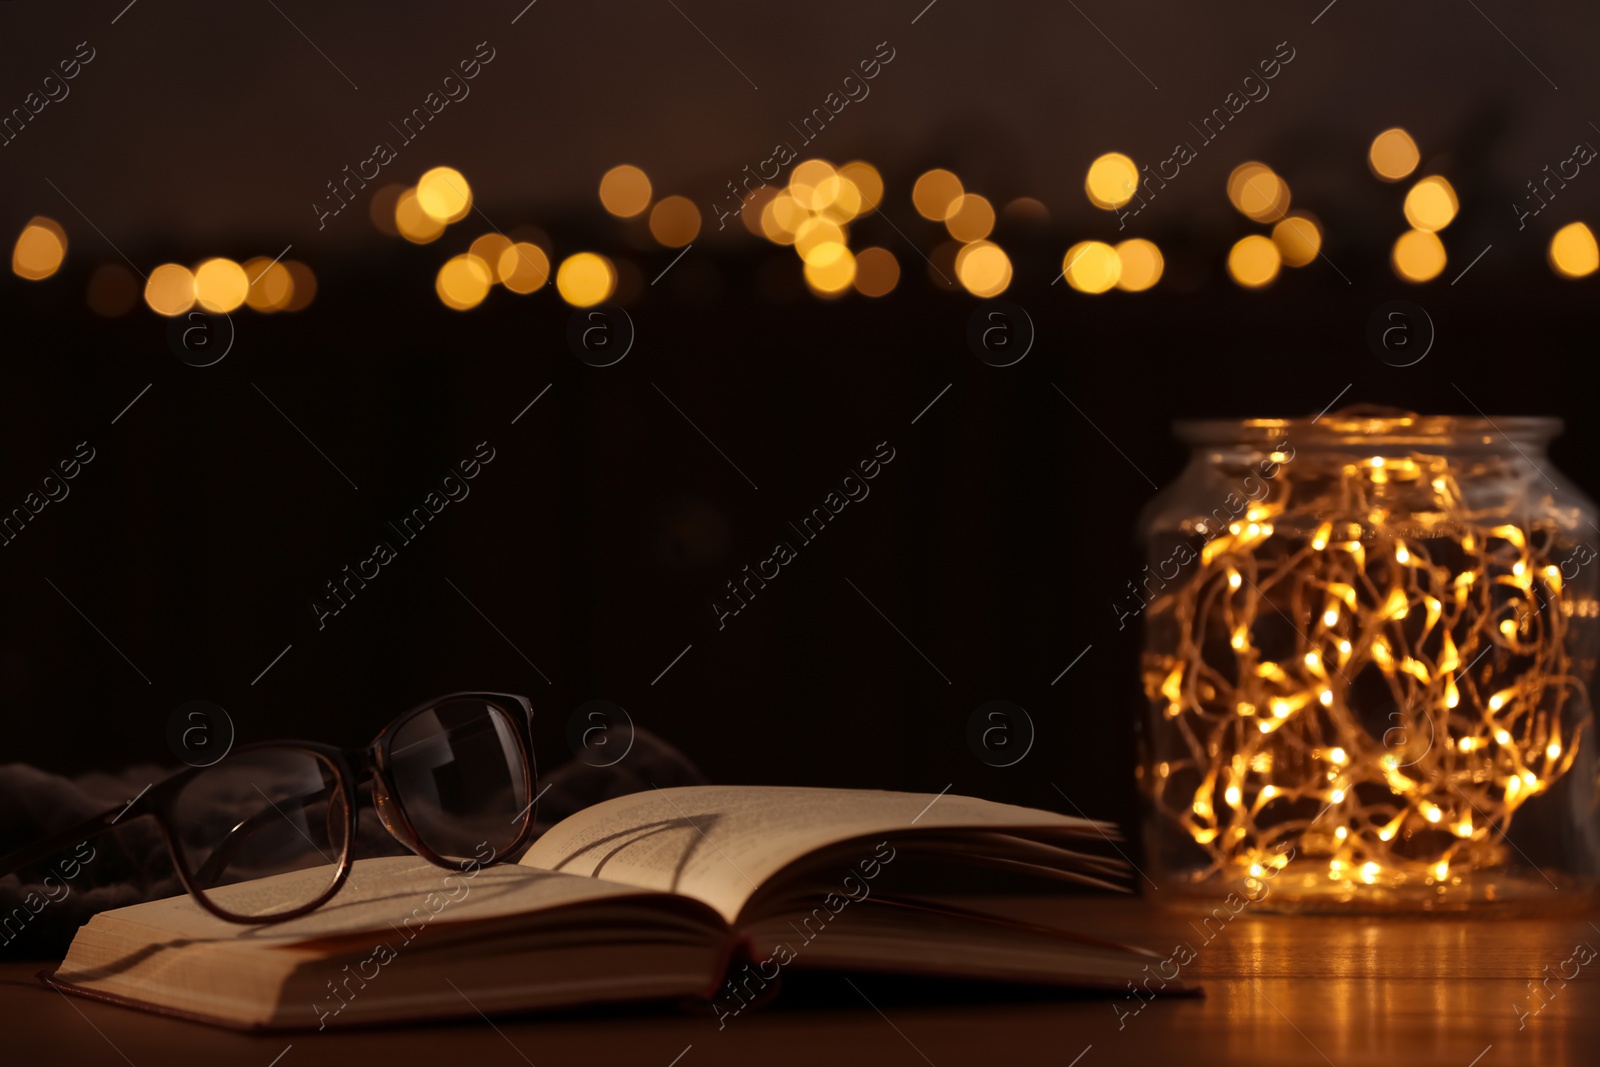 Photo of Eyeglasses and open book on wooden table against festive lights. Space for text